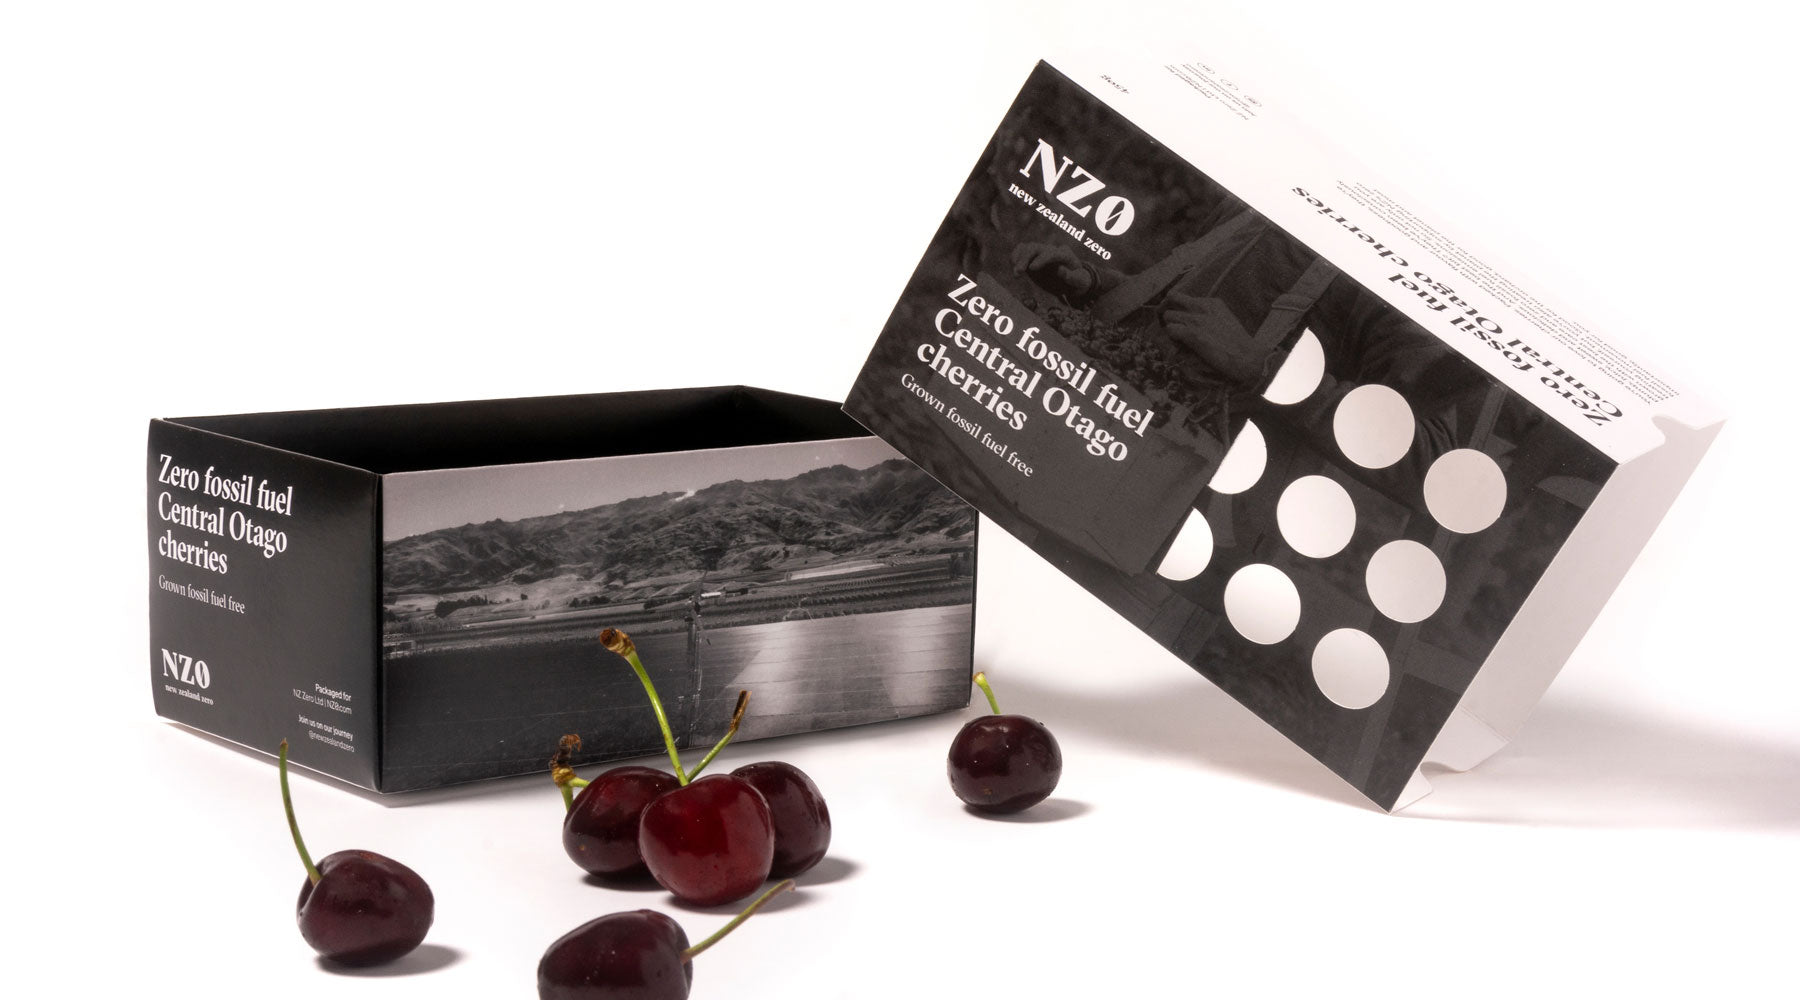 Cherry Pilot Packaging, Grown Fossil Fuel Free.